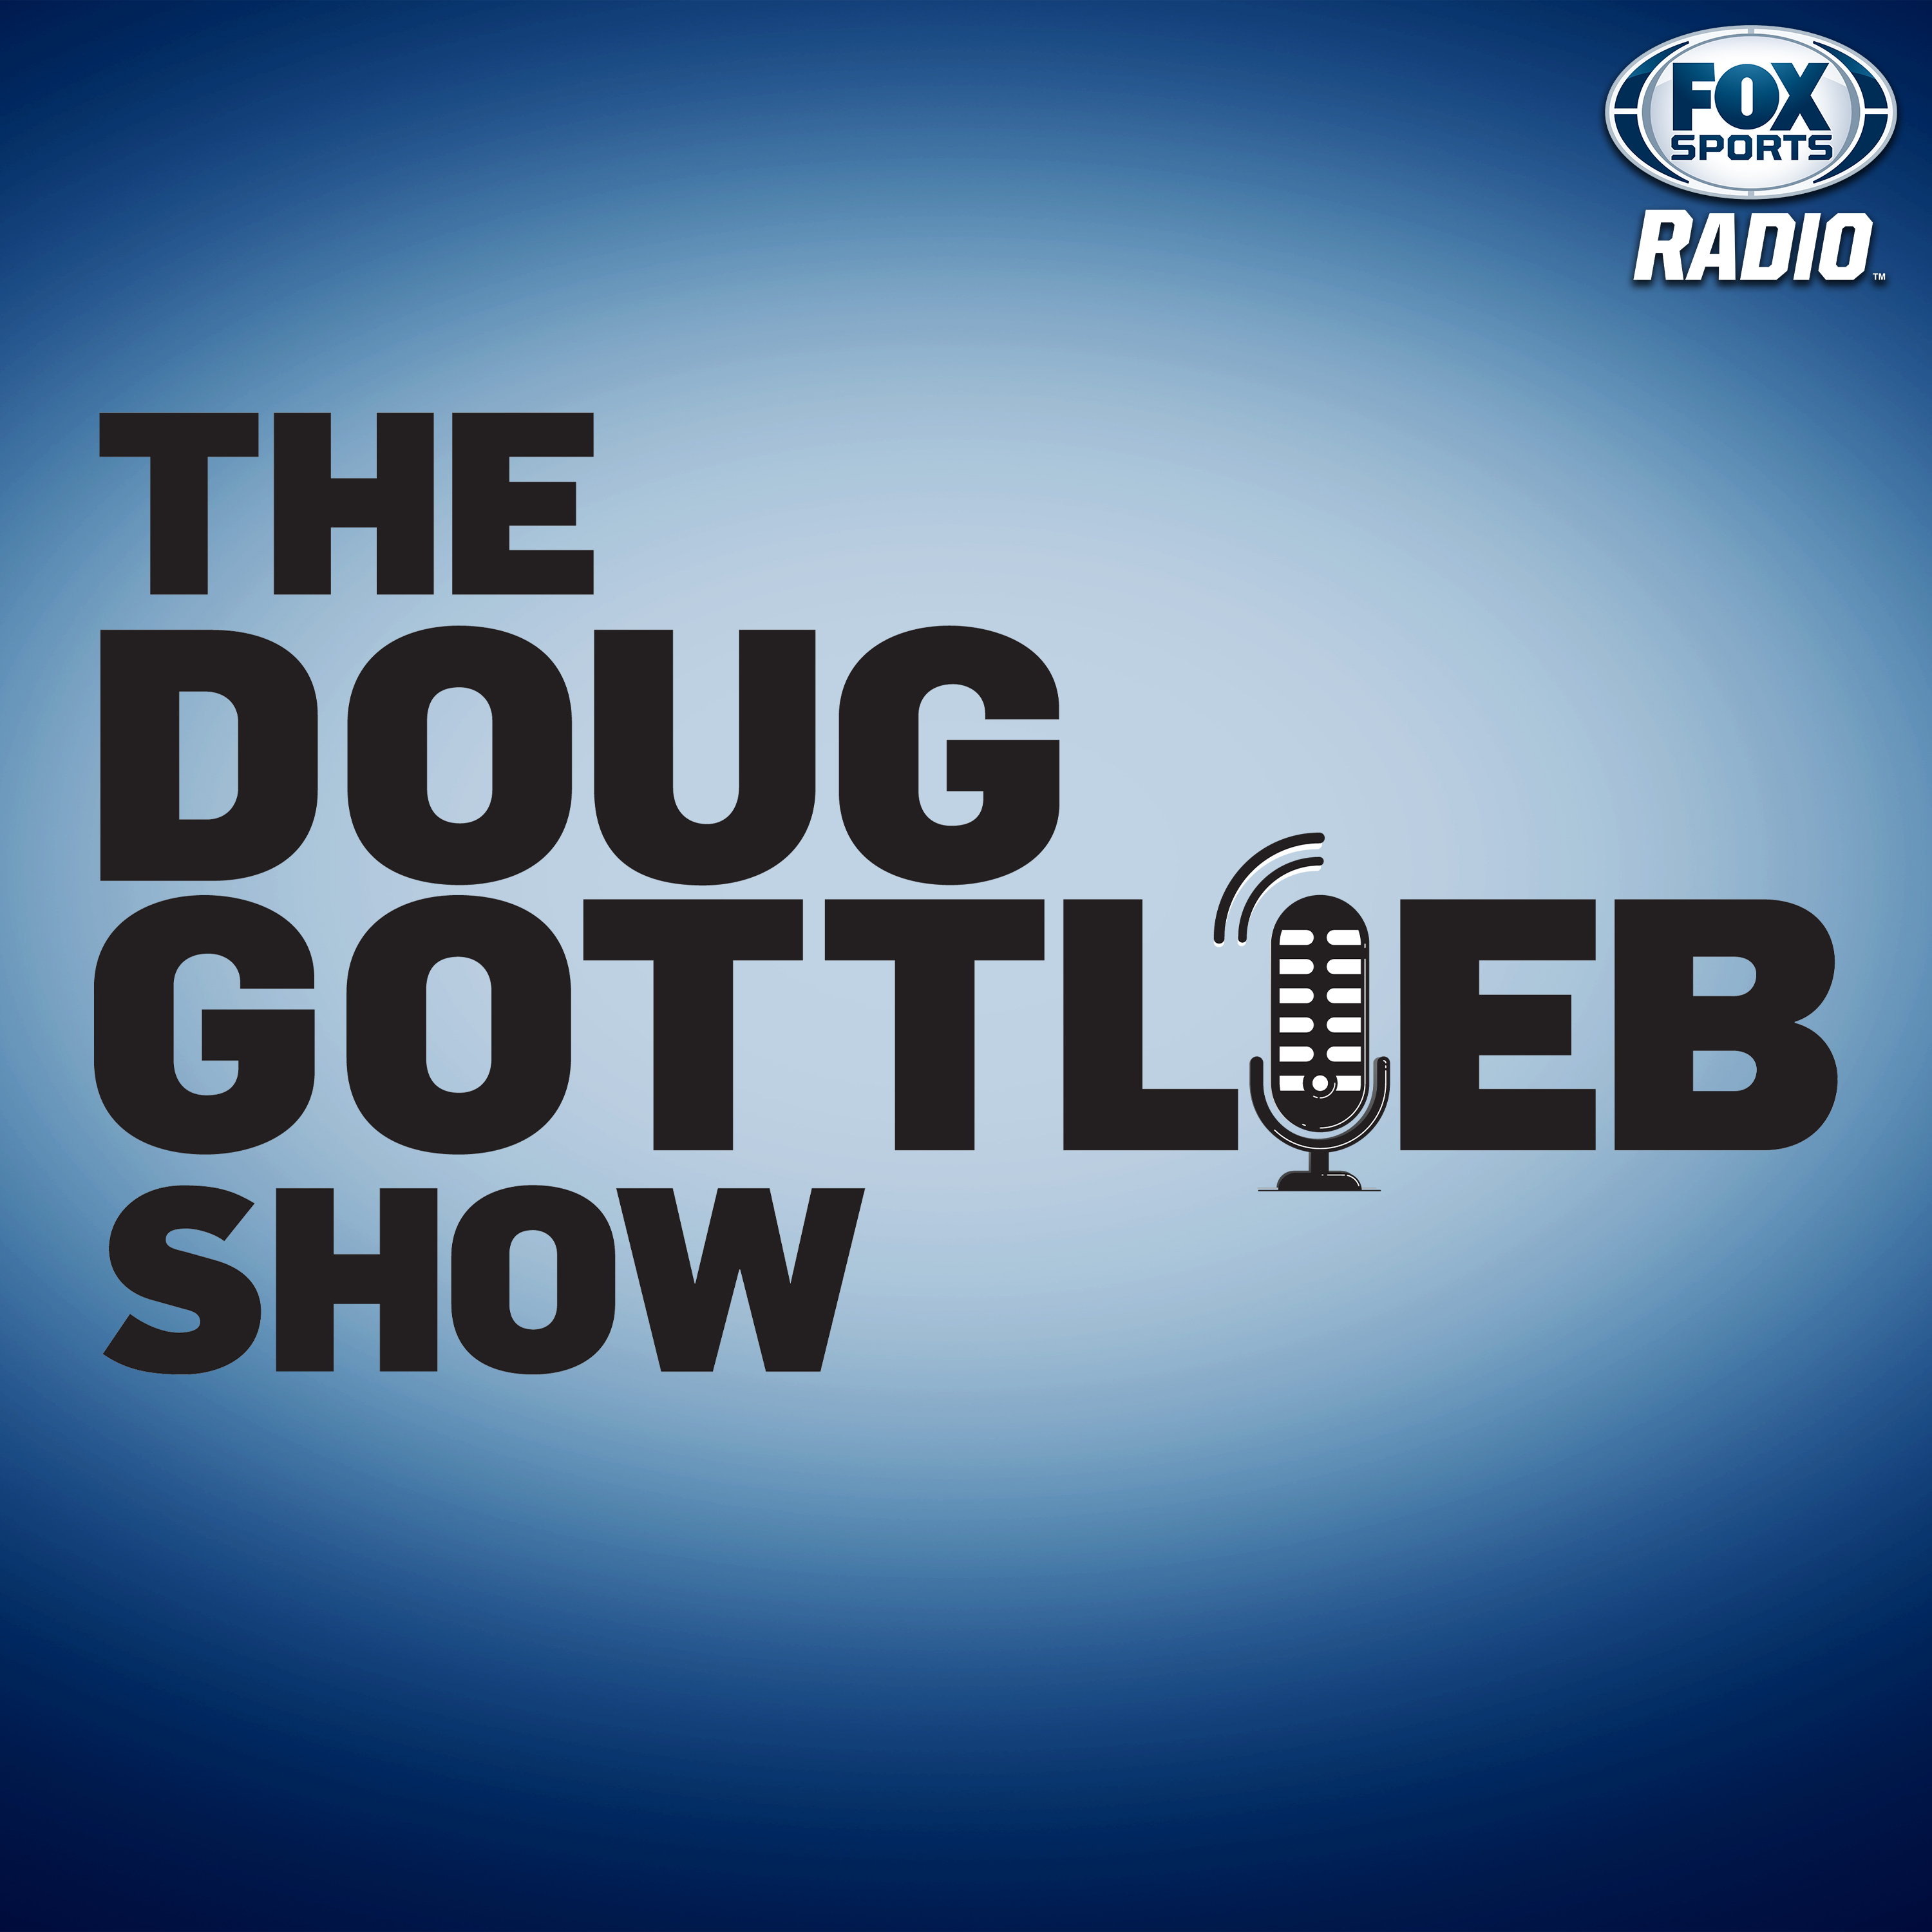 THE BEST OF THE WEEK OF THE DOUG GOTTLIEB